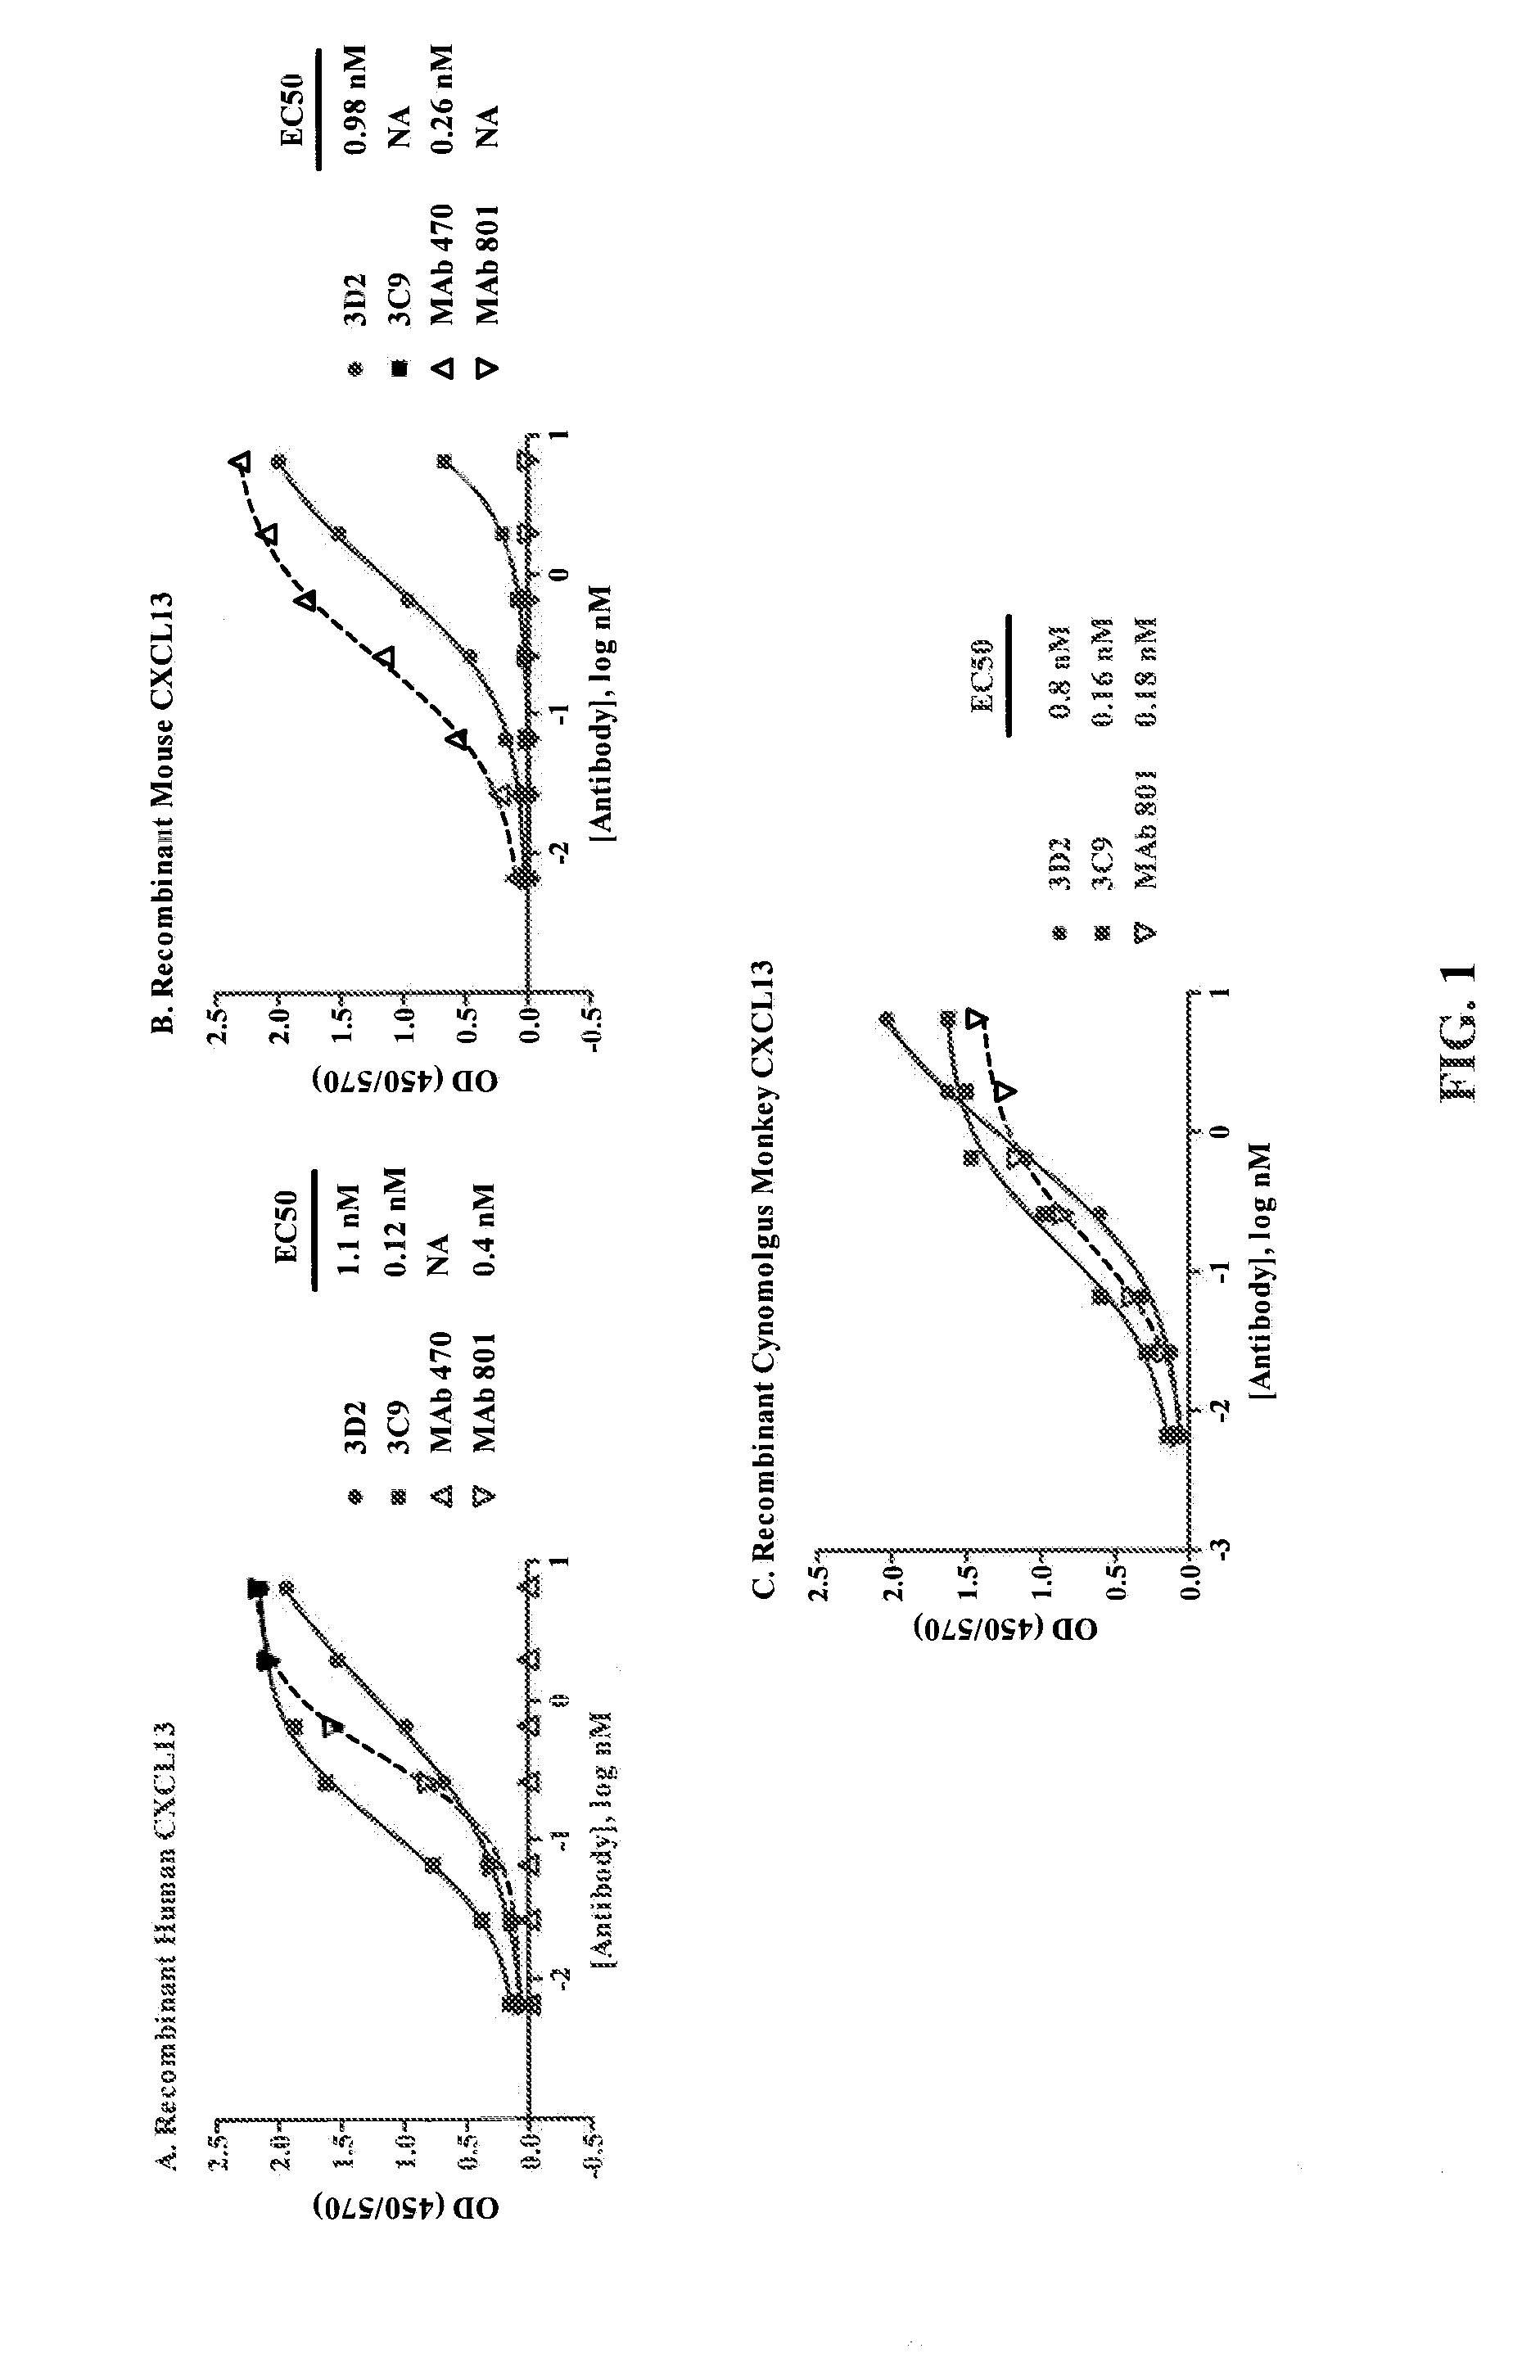 Anti-cxcl13 antibodies and methods of using the same